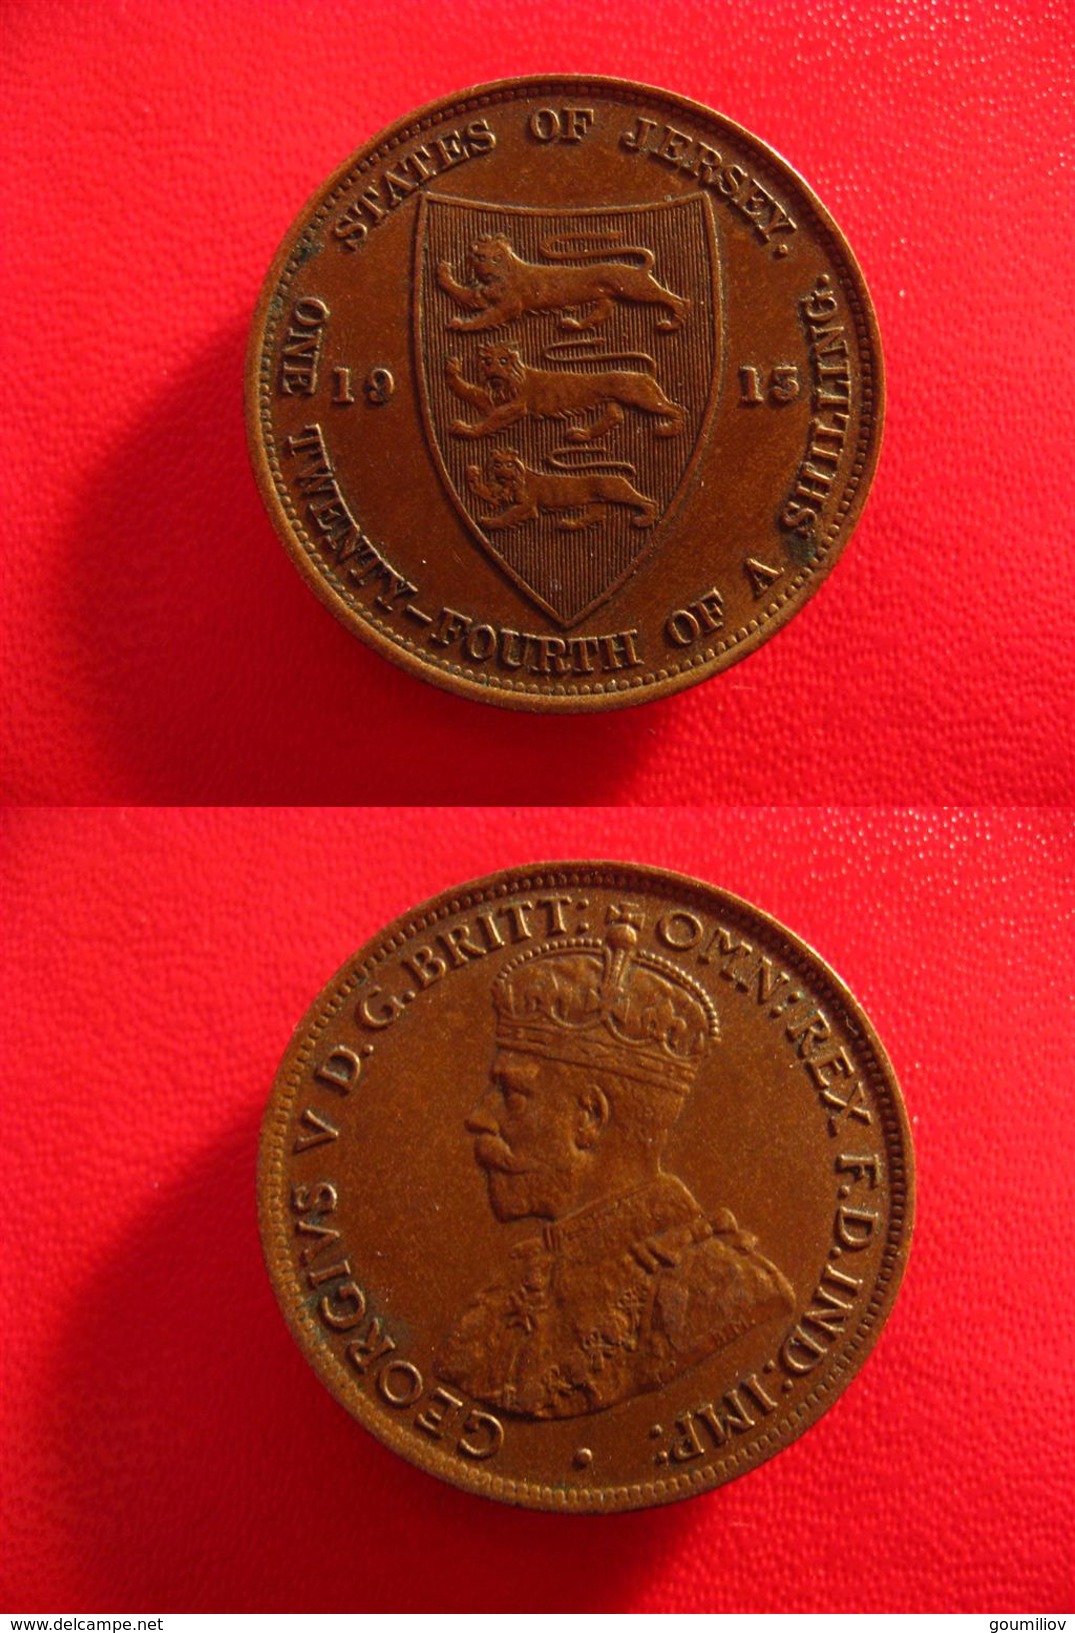 States Of Jersey - One Twenty-fourth Of A Shilling Georges V 1913 4774 - Jersey